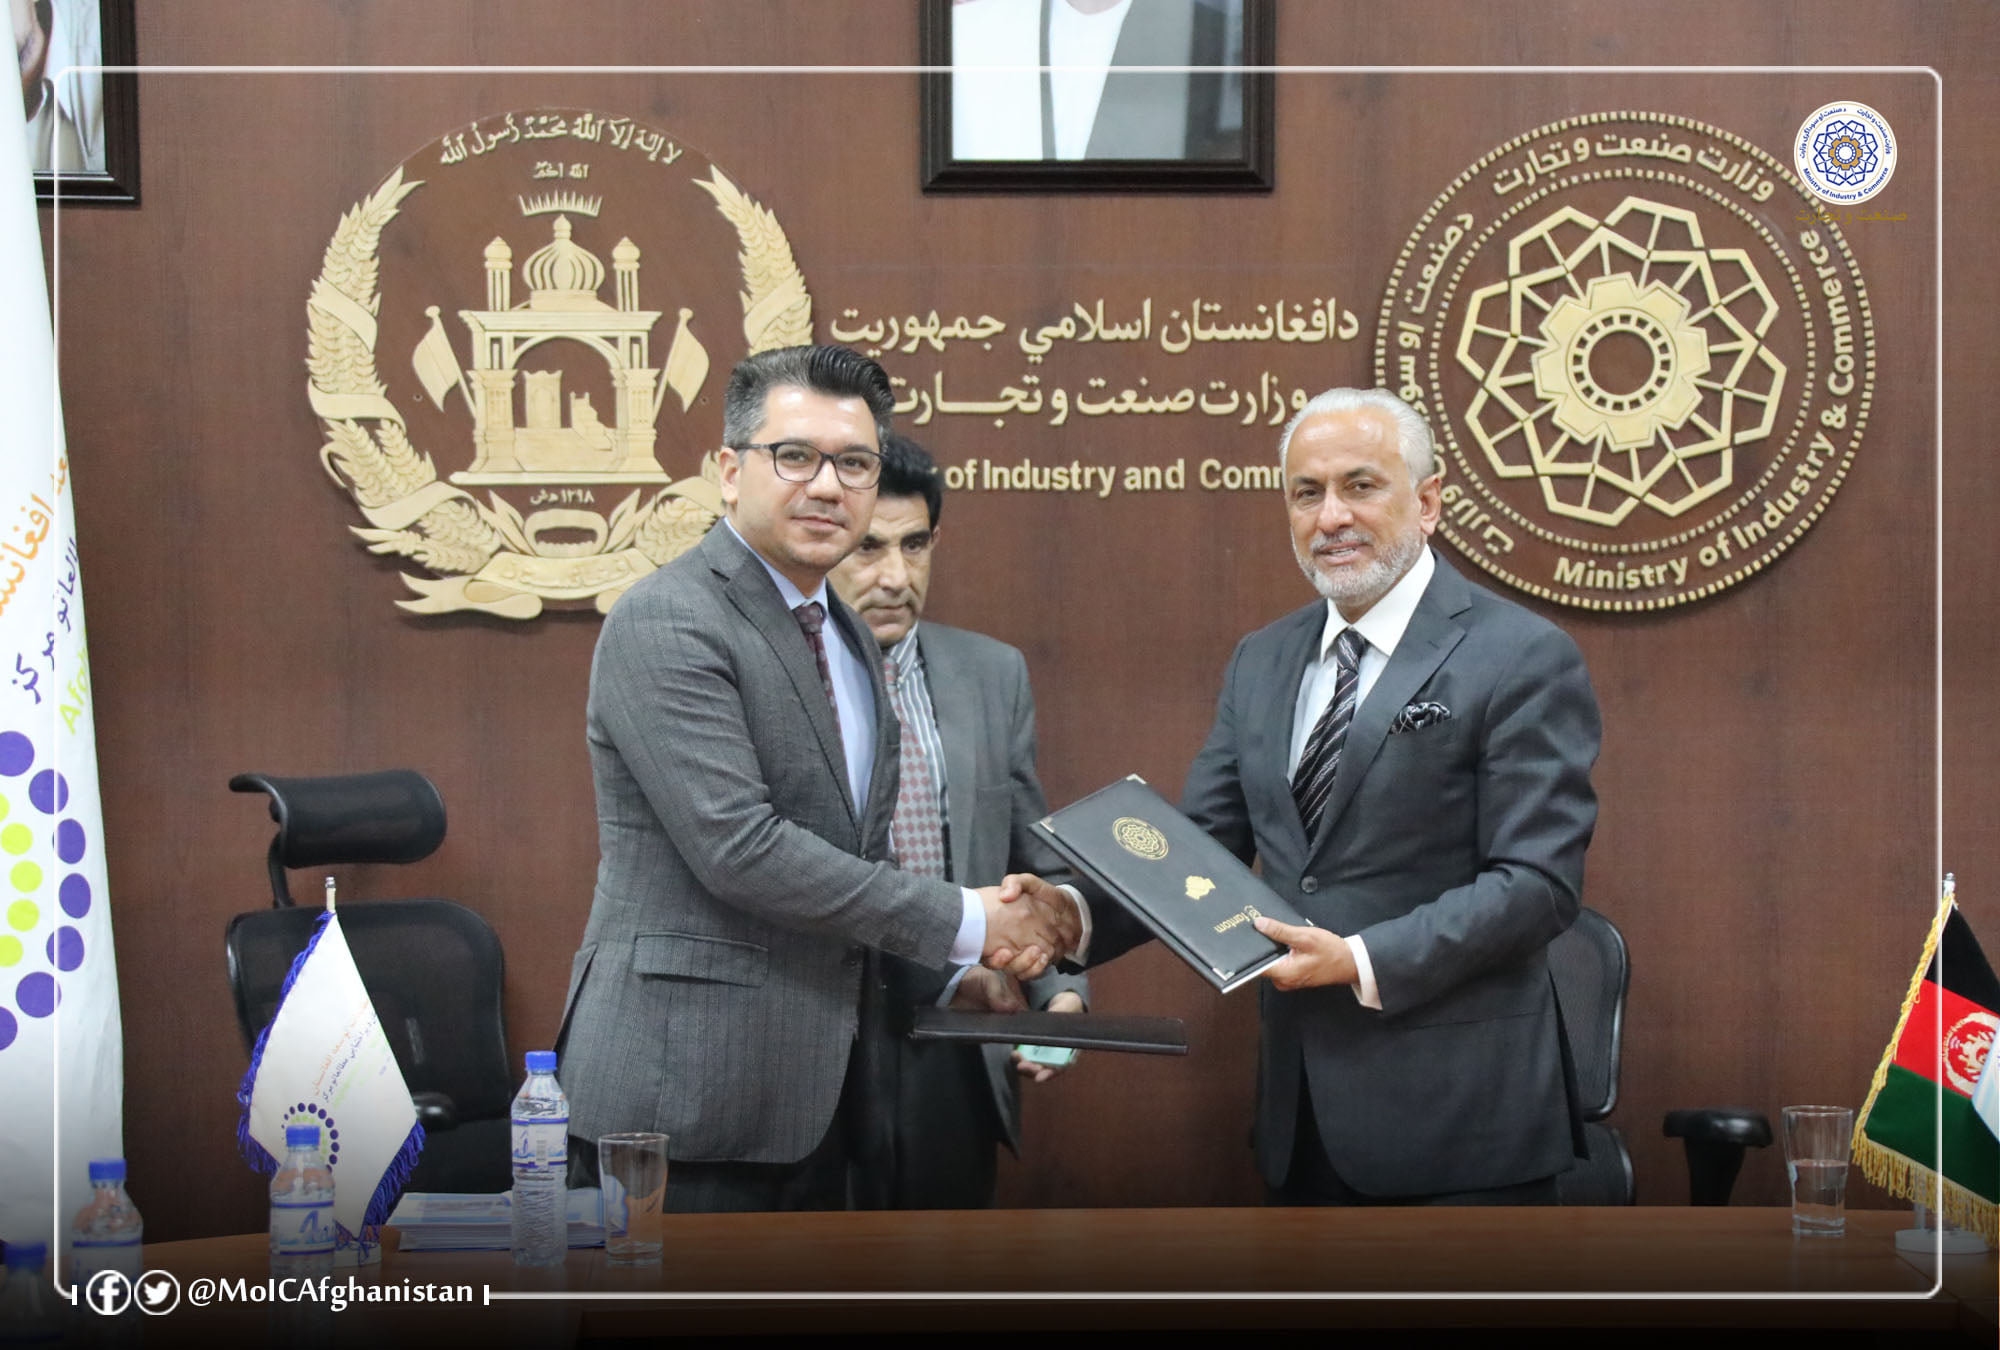 The signing of an MoU between the Ministry of Industry and Commerce and the Afghanistan Development Studies Center